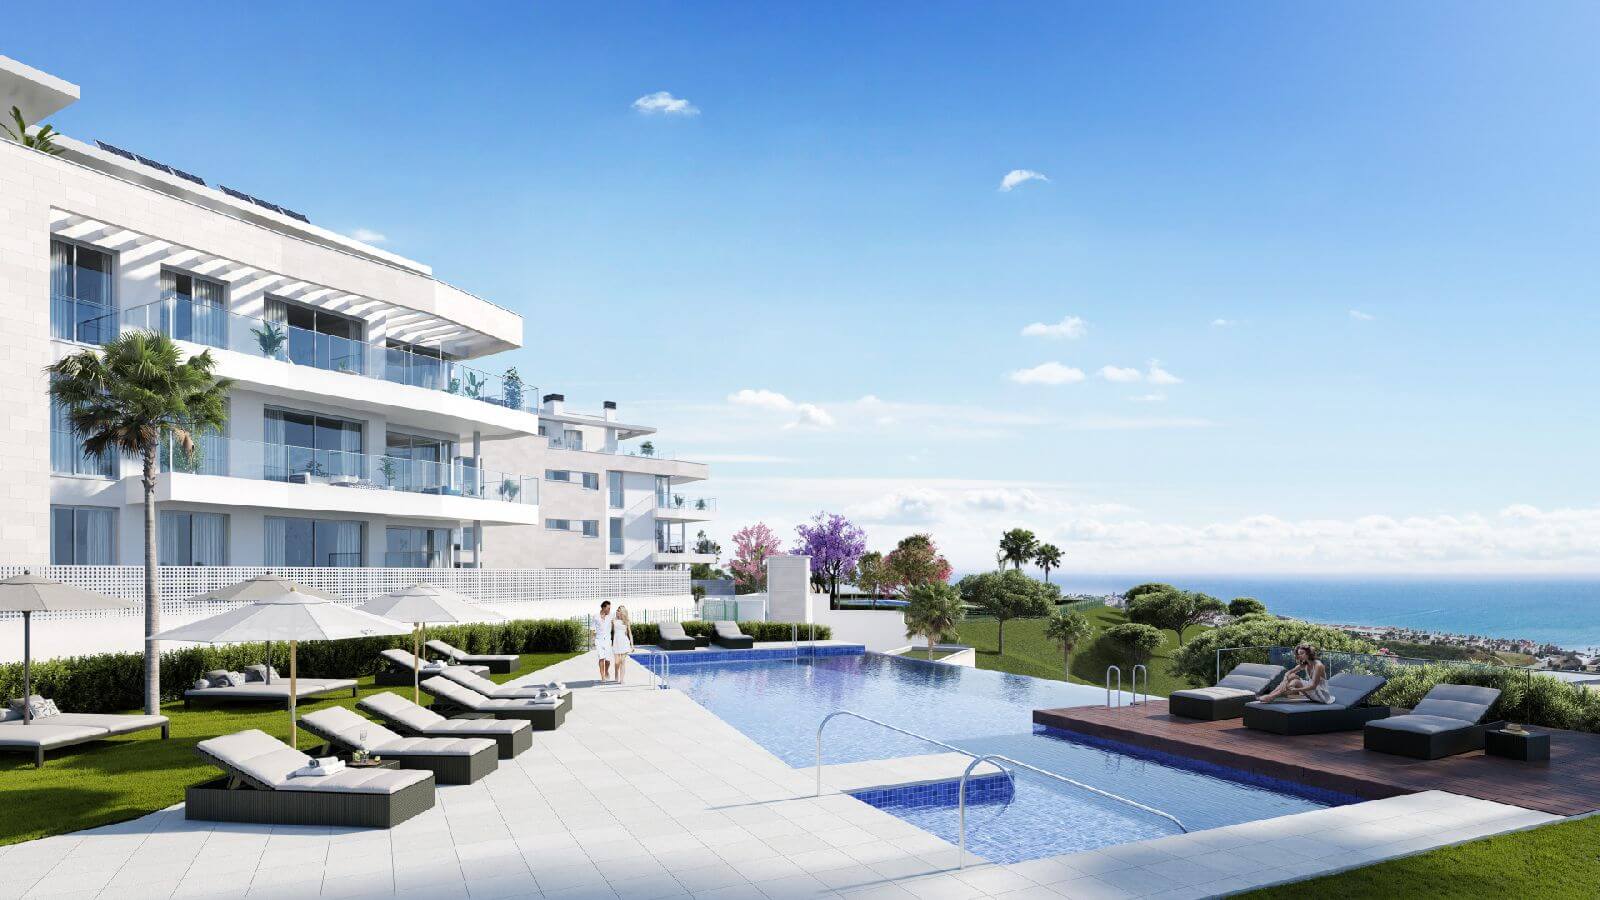 Exclusive apartments ideal for rent in Mijas